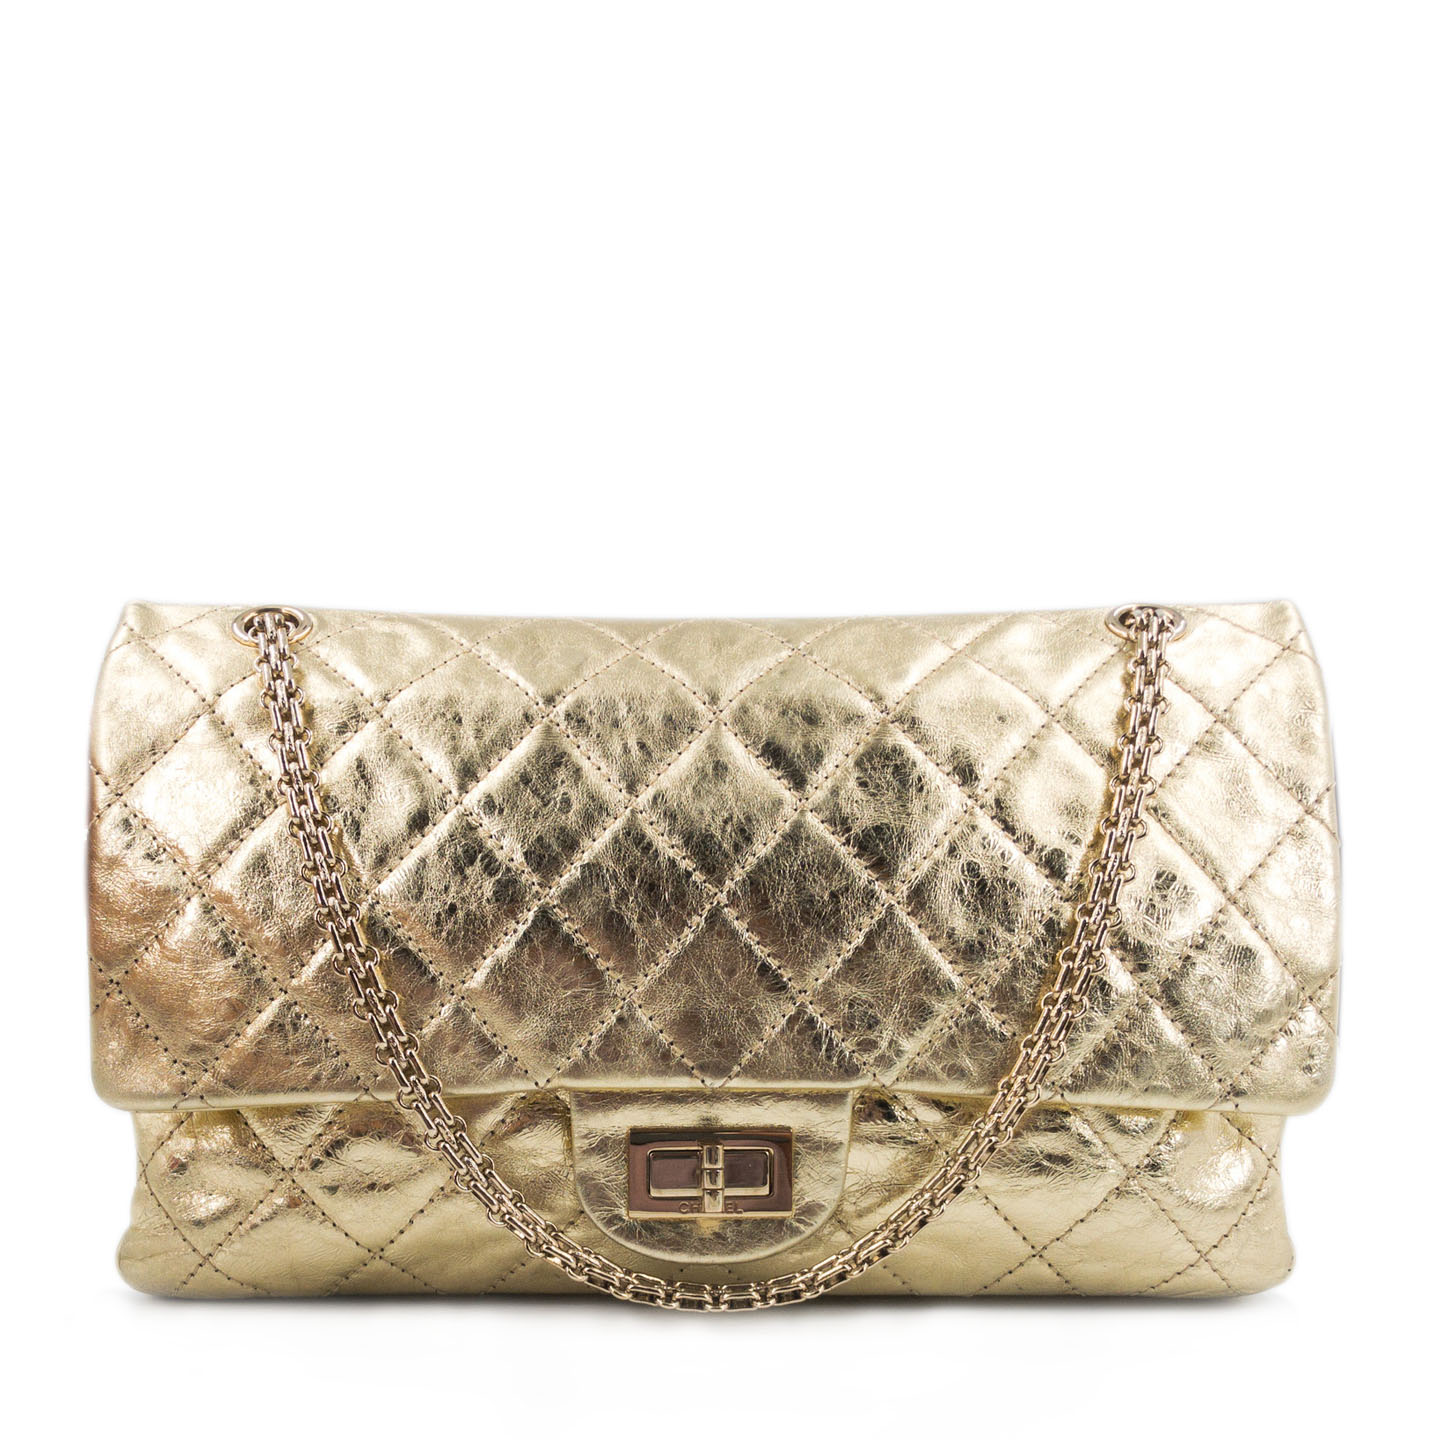 Chanel Gold Reissue 2.55 Quilted Calfskin Leather 226 Flap Bag ...